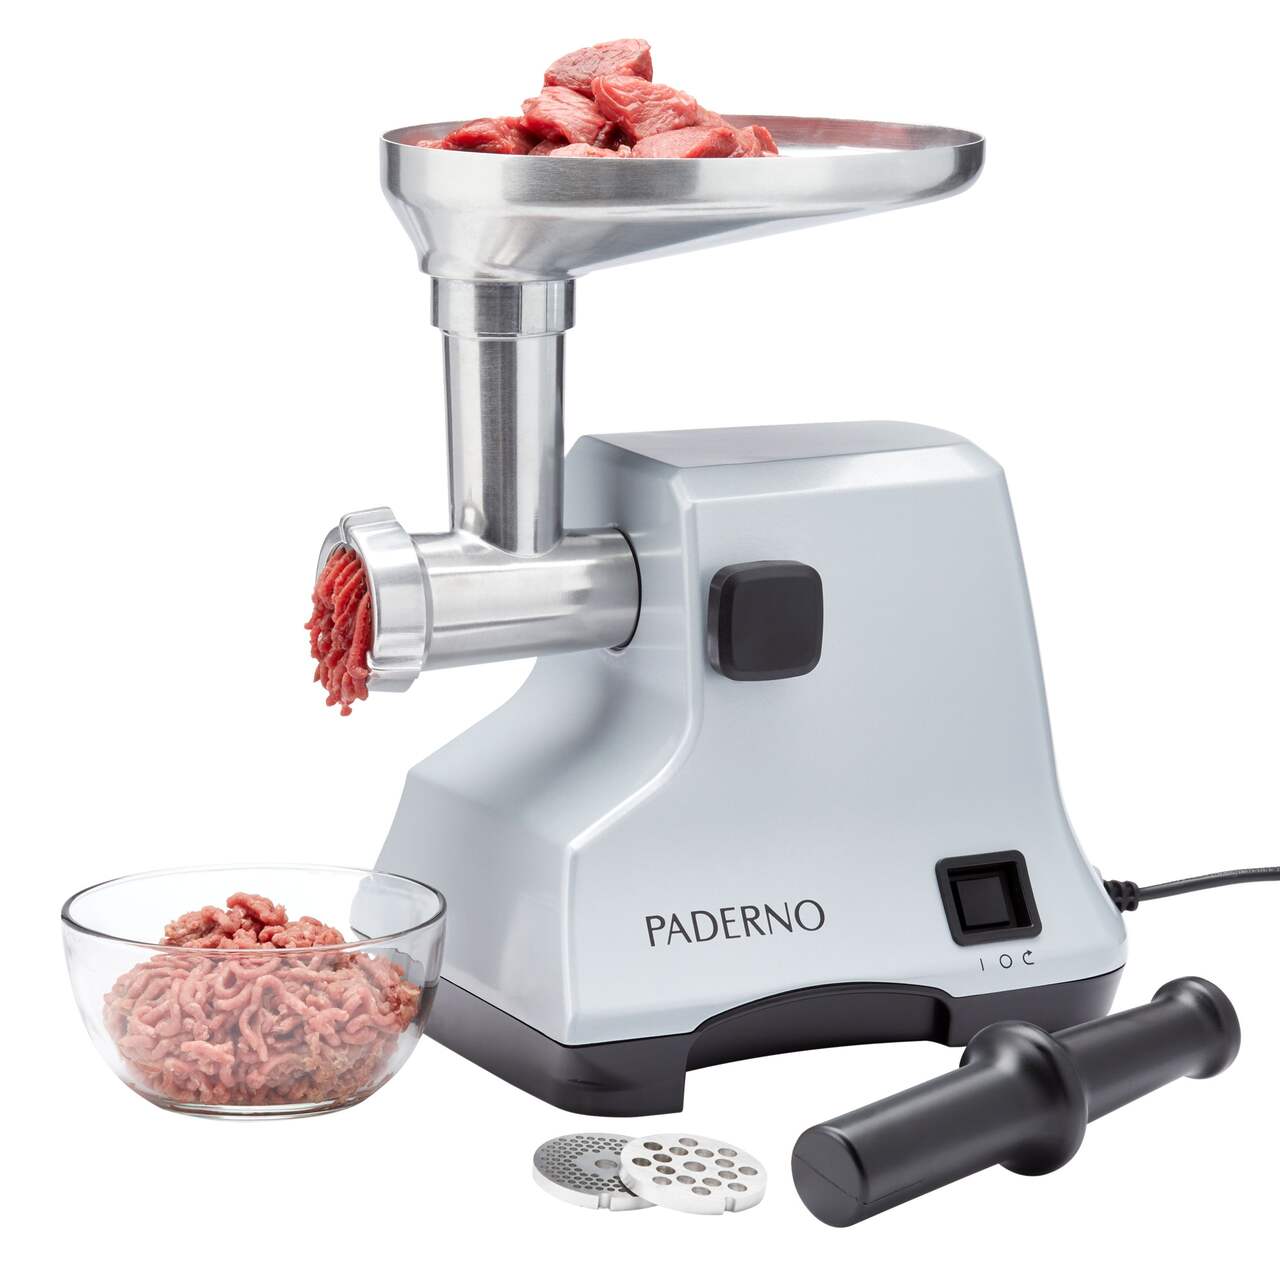 https://media-www.canadiantire.ca/product/living/kitchen/kitchen-appliances/0431030/paderno-electric-meat-grinder-424bd0f8-b649-4d7e-920e-c5e804b66a68-jpgrendition.jpg?imdensity=1&imwidth=640&impolicy=mZoom